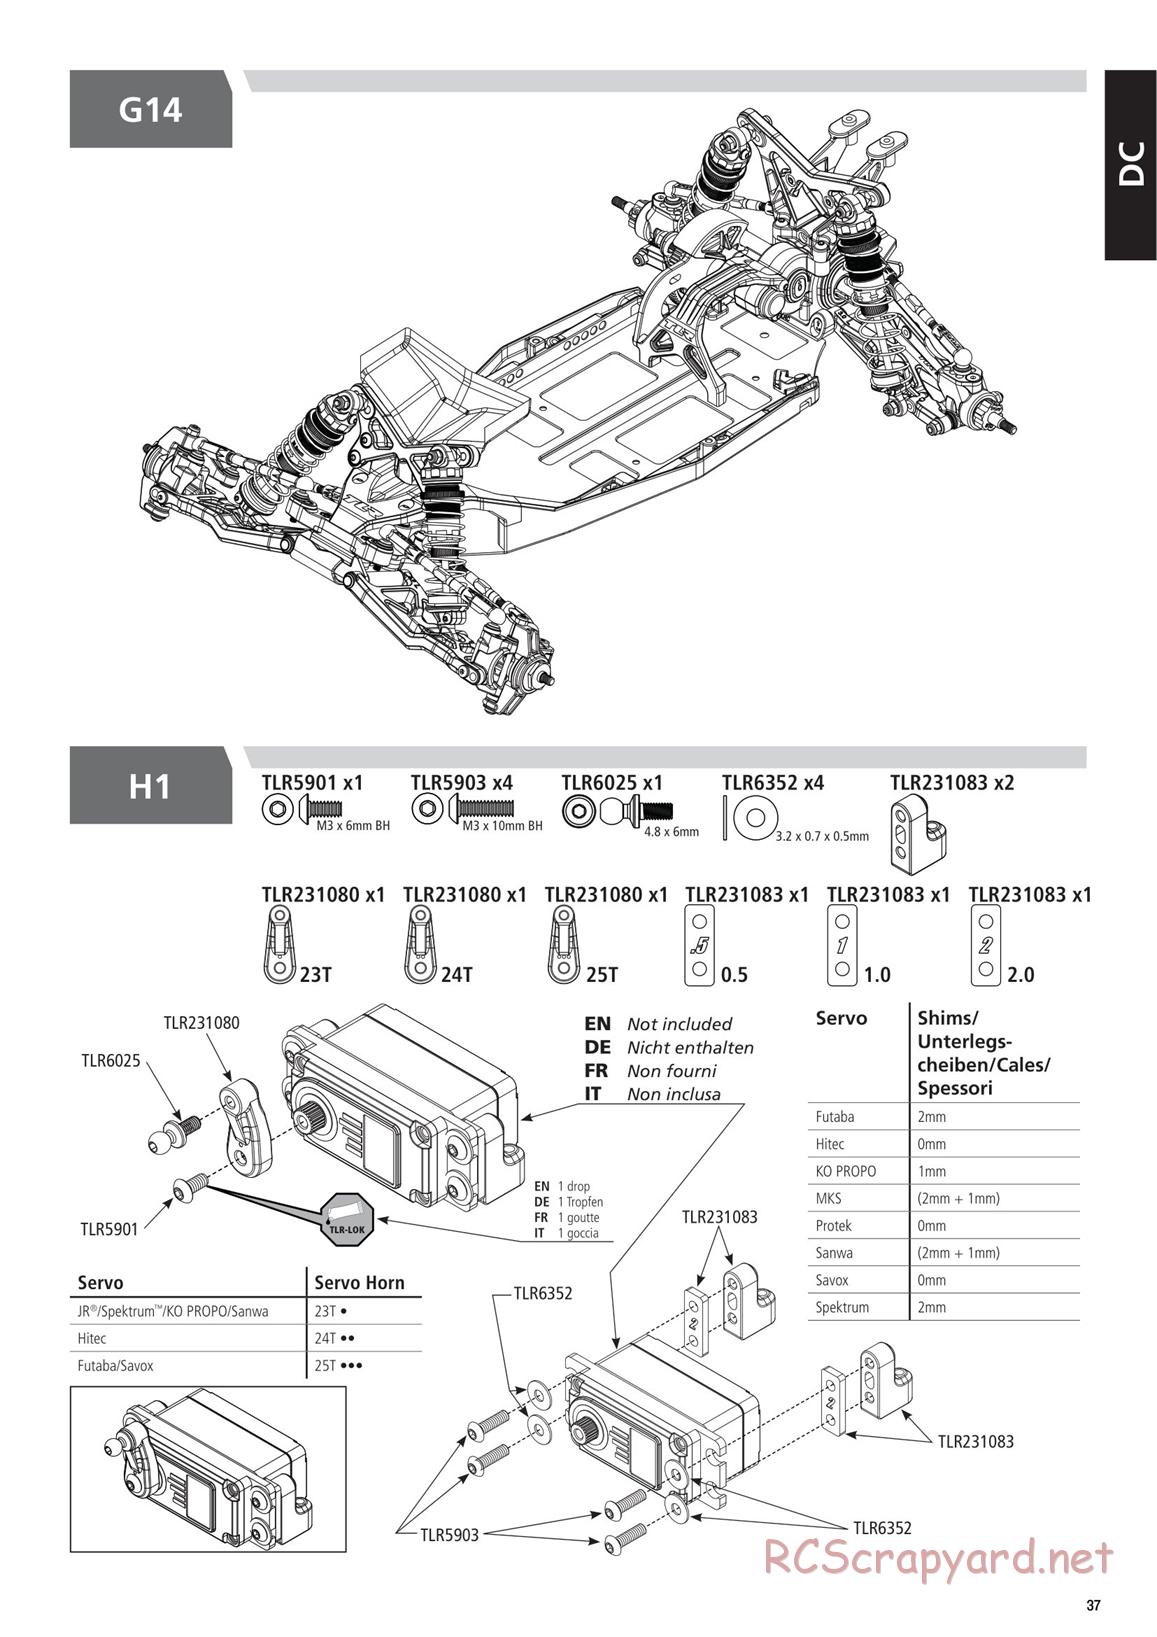 Team Losi - TLR 22 5.0 DC Race - Manual - Page 37